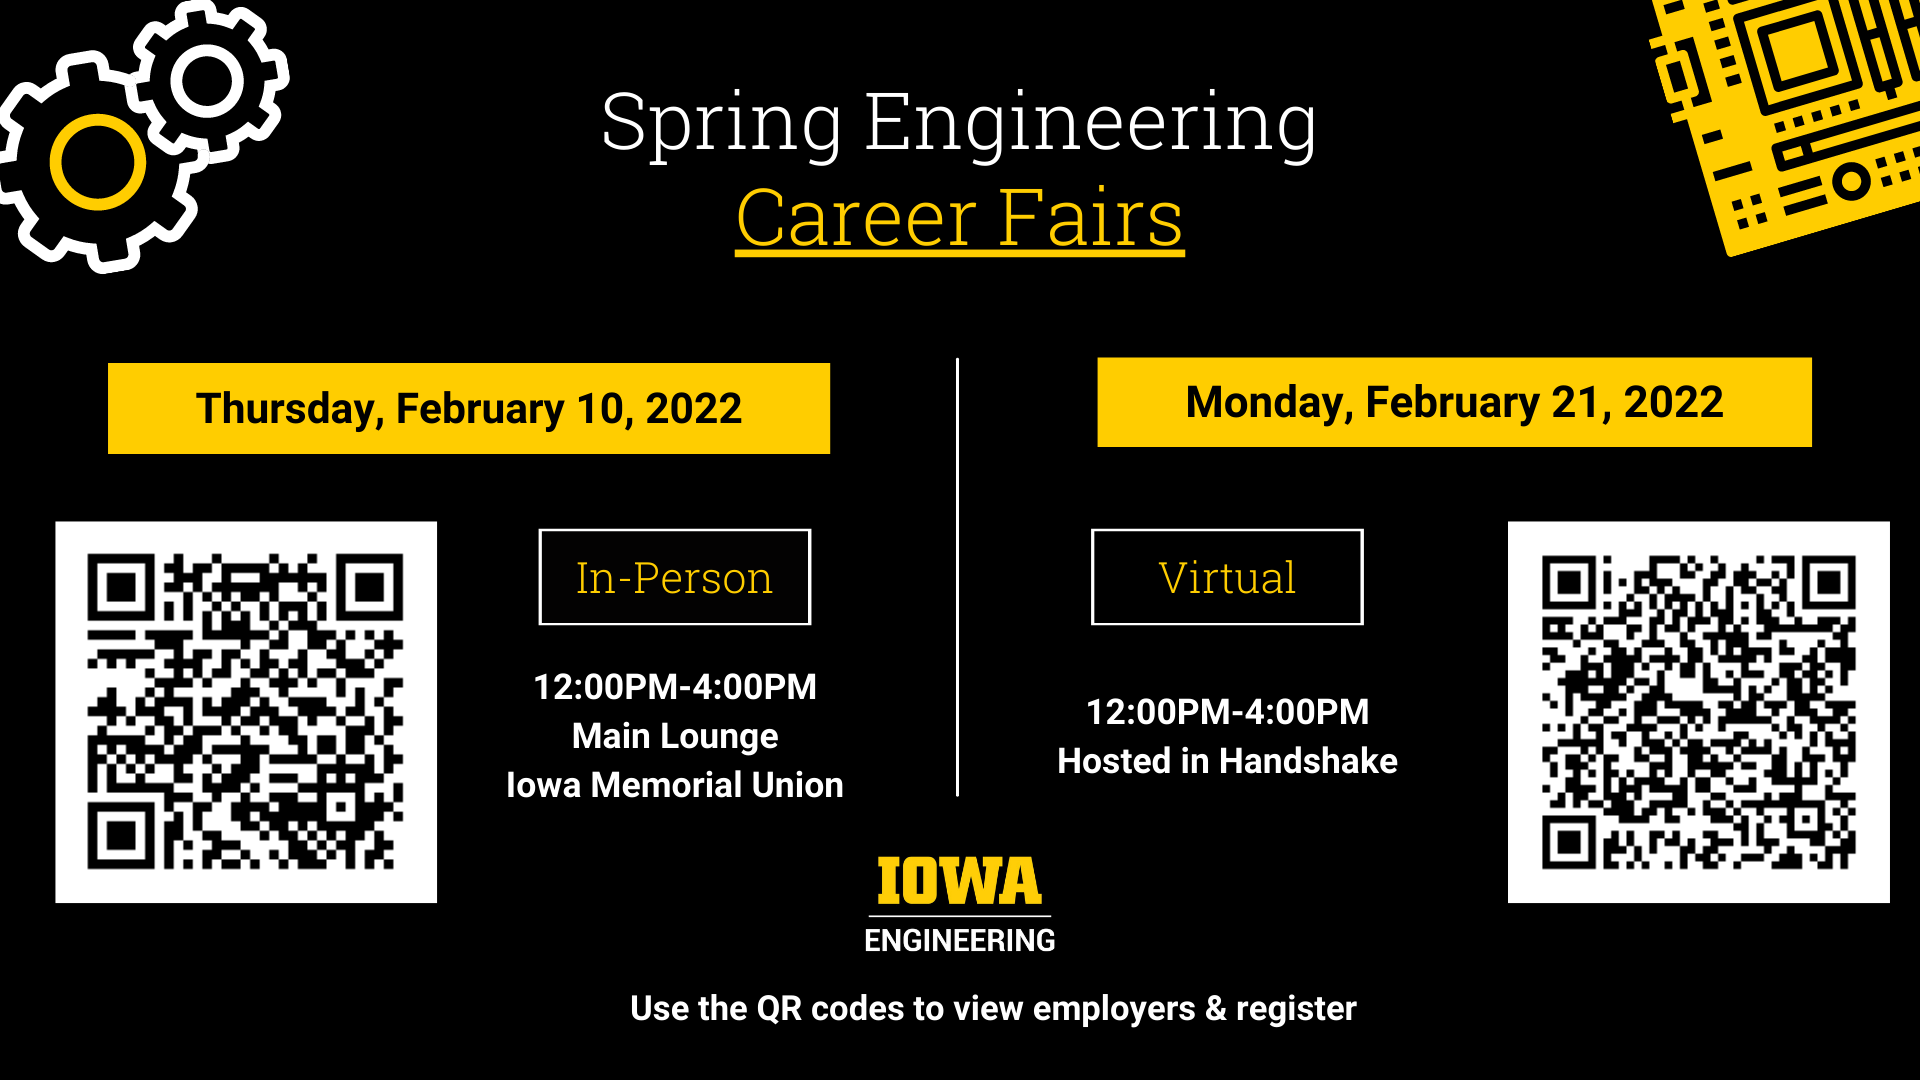 2022 Dates of Engineering career fairs. In person Feb 10 and virtual Feb 21